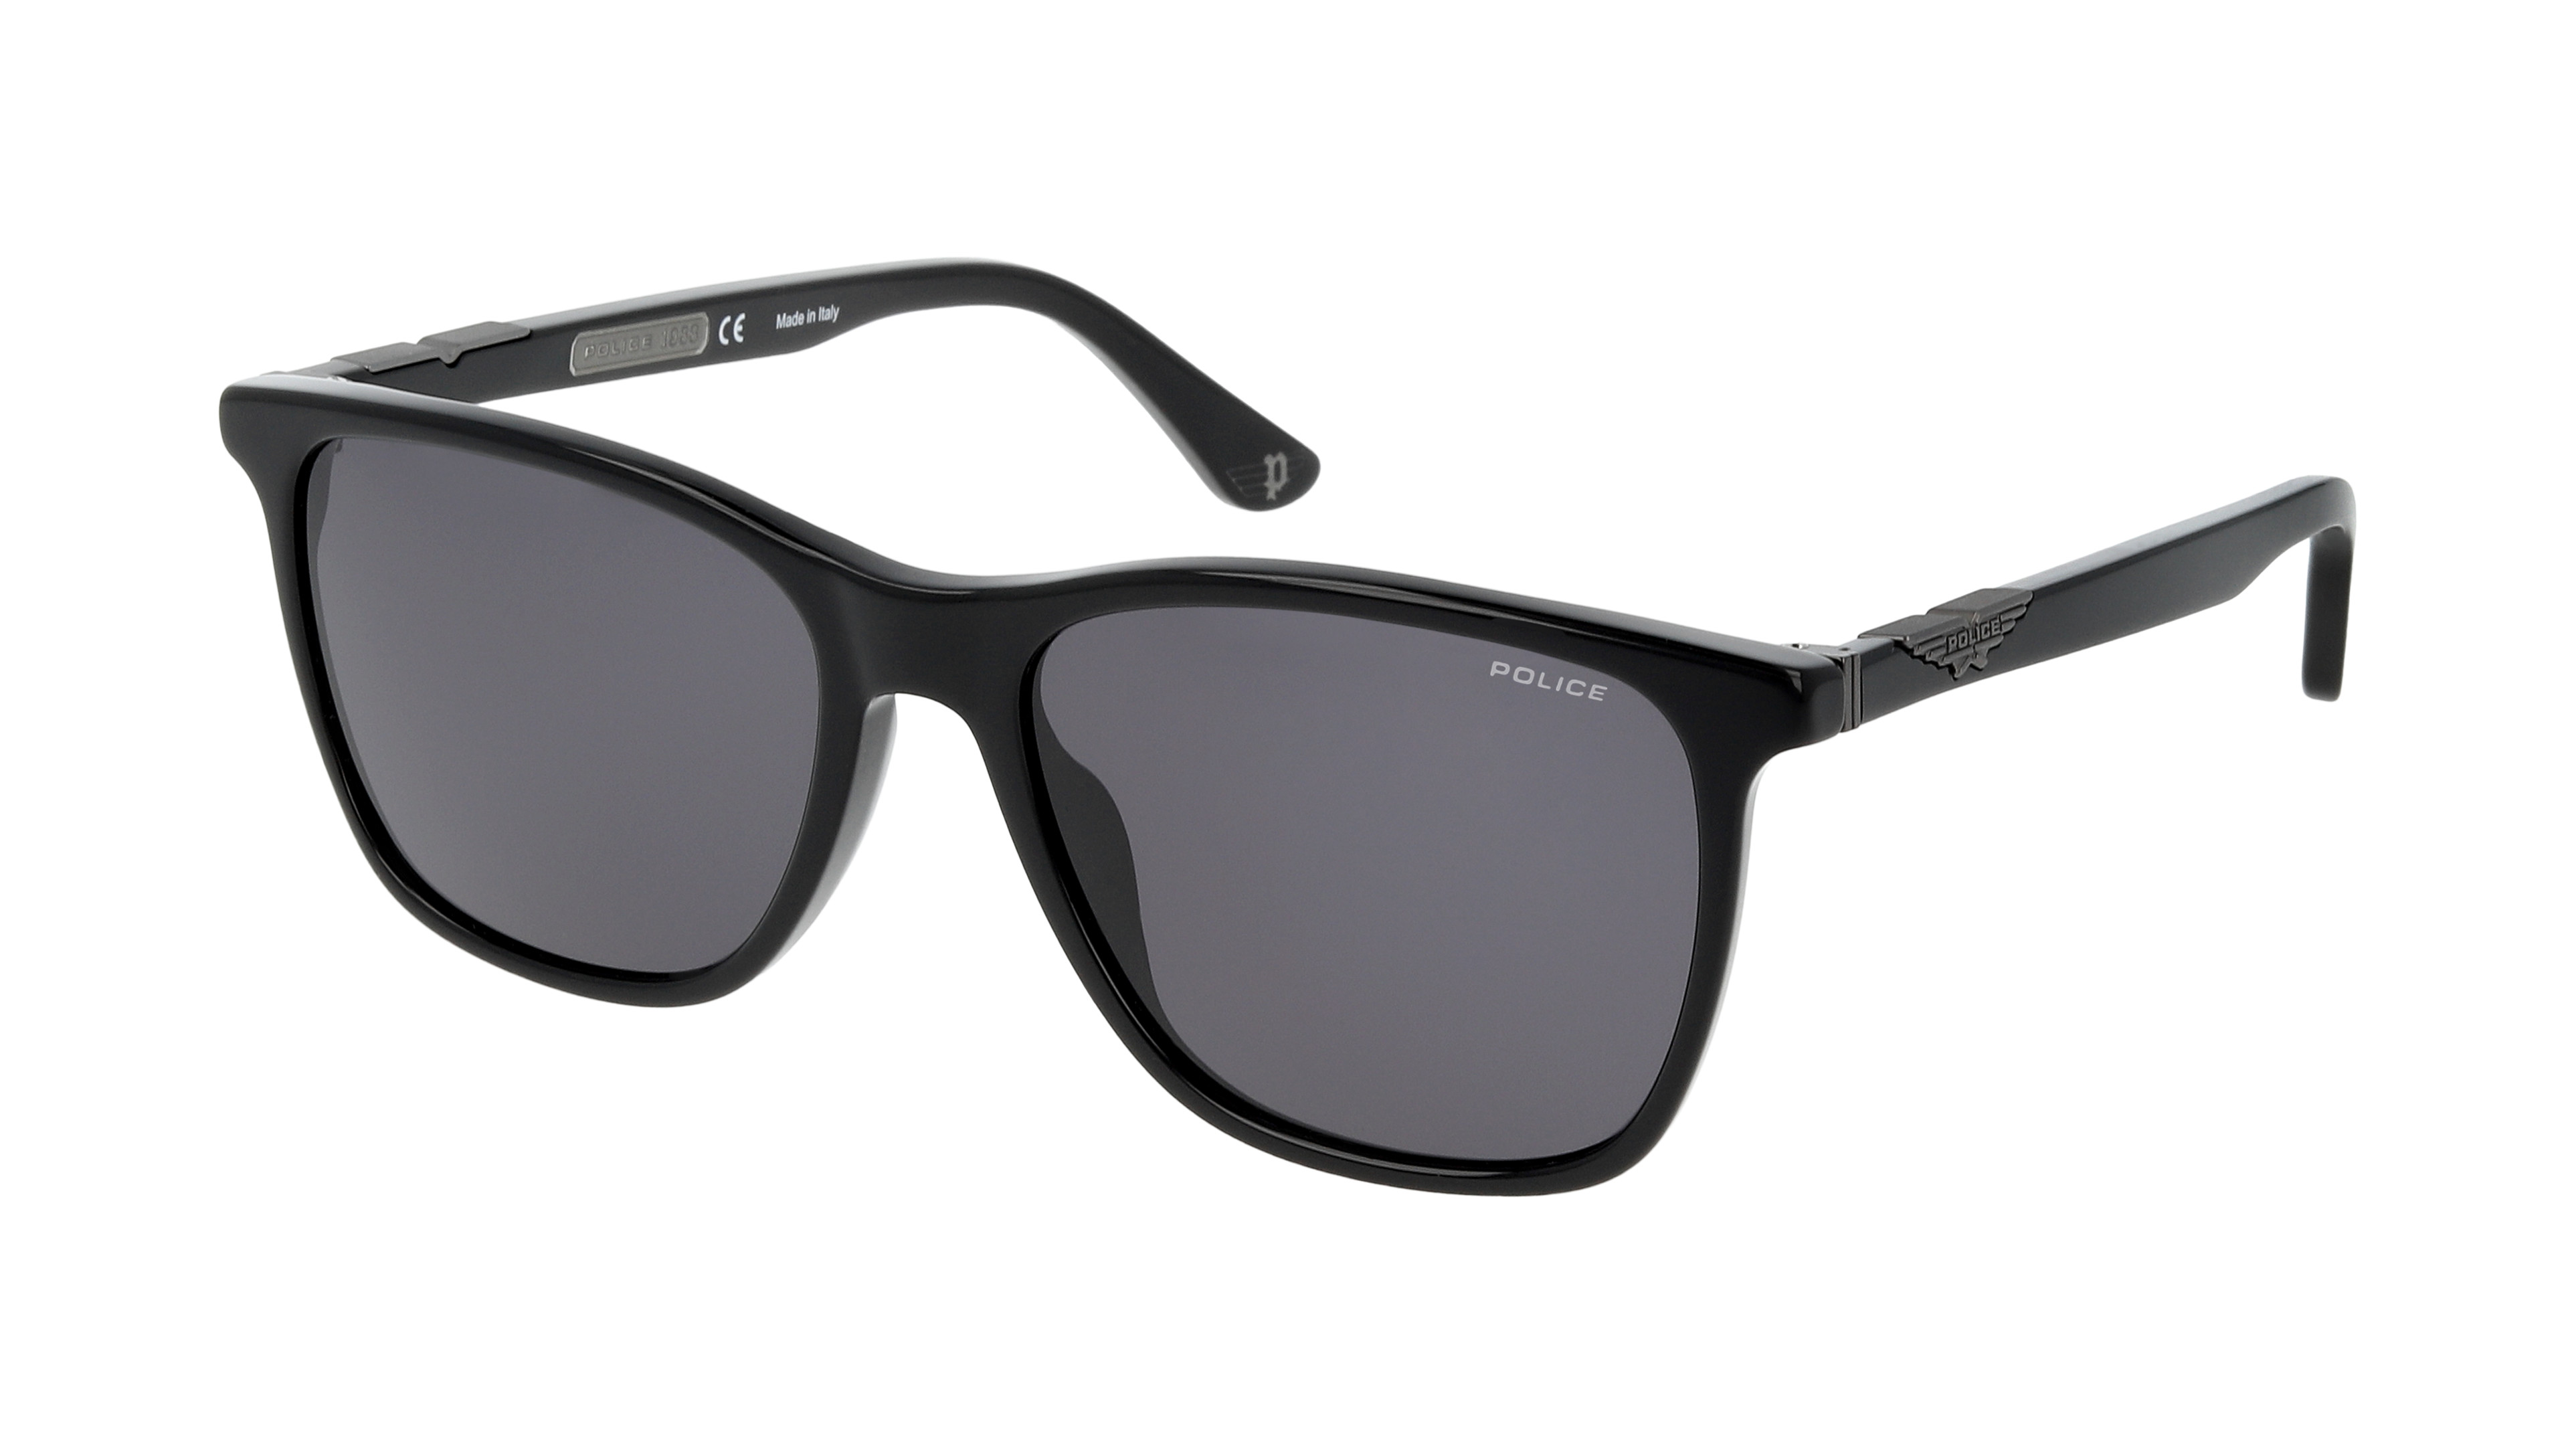 [products.image.angle_left01] Police Origins 1 SPL872N 700 Sonnenbrille